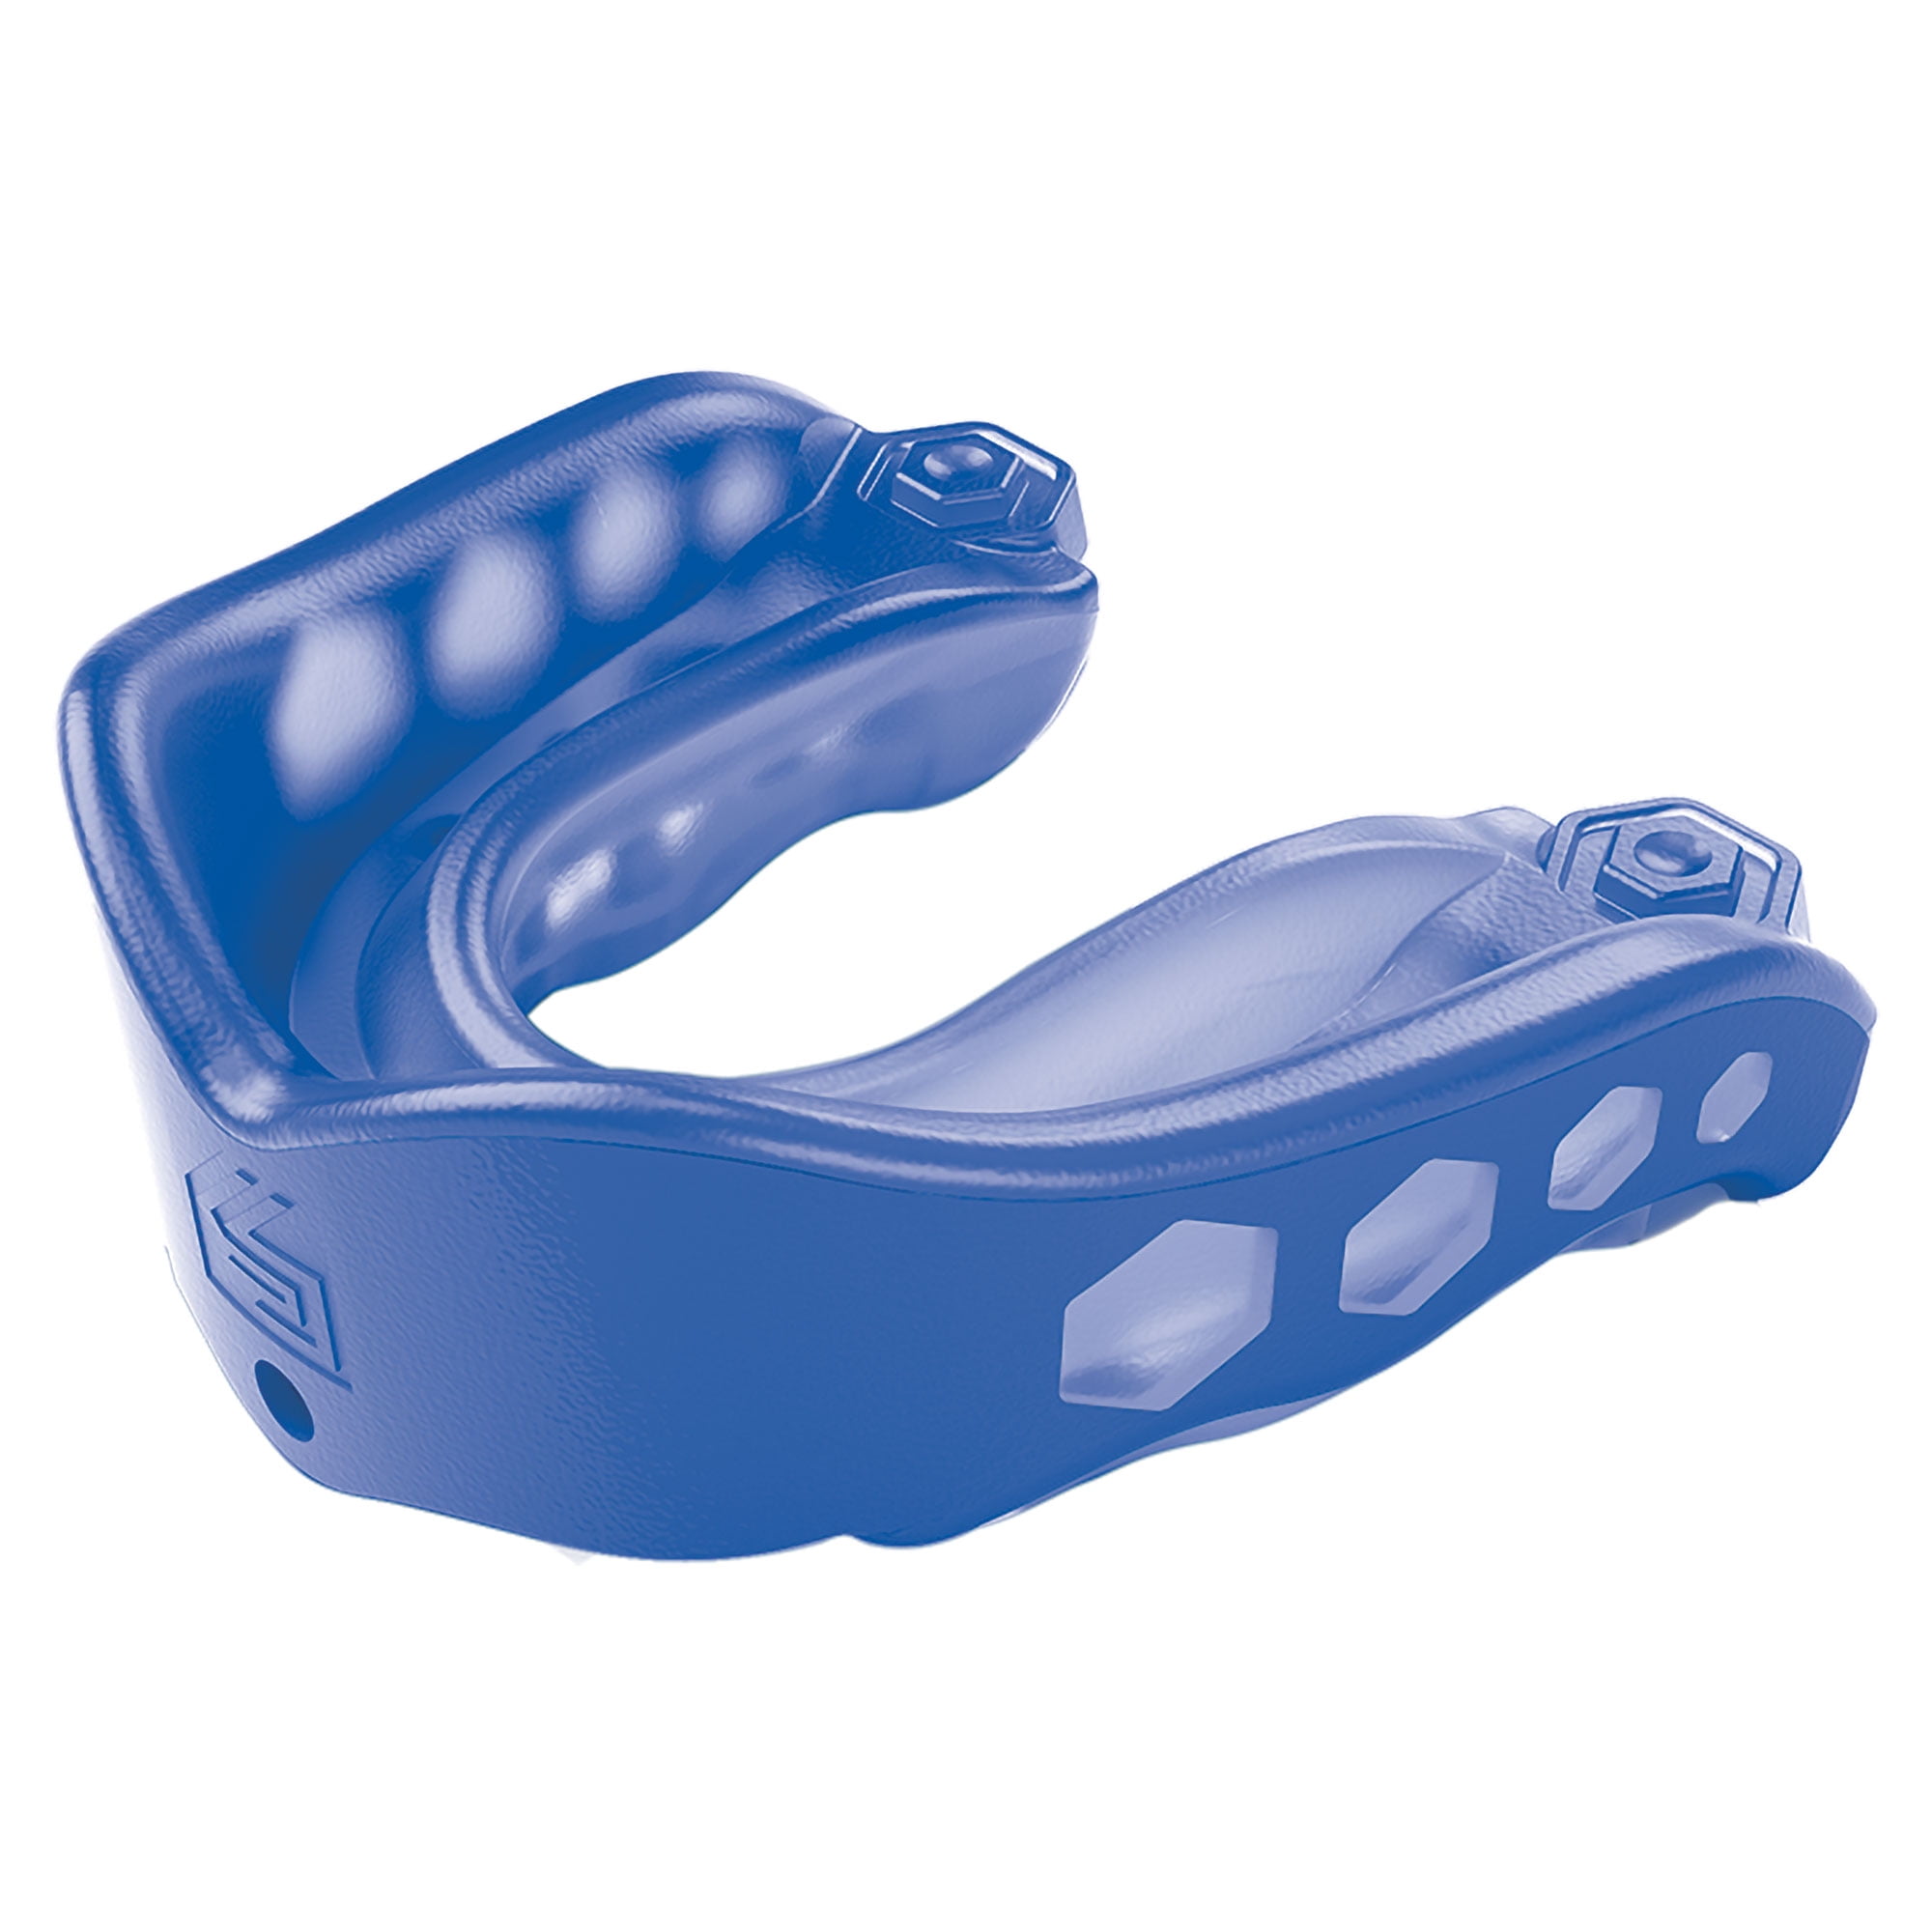 Details about   Shock Doctor sport gel Max Mouth Guard flavor Fusion  punch age 11 Box U 